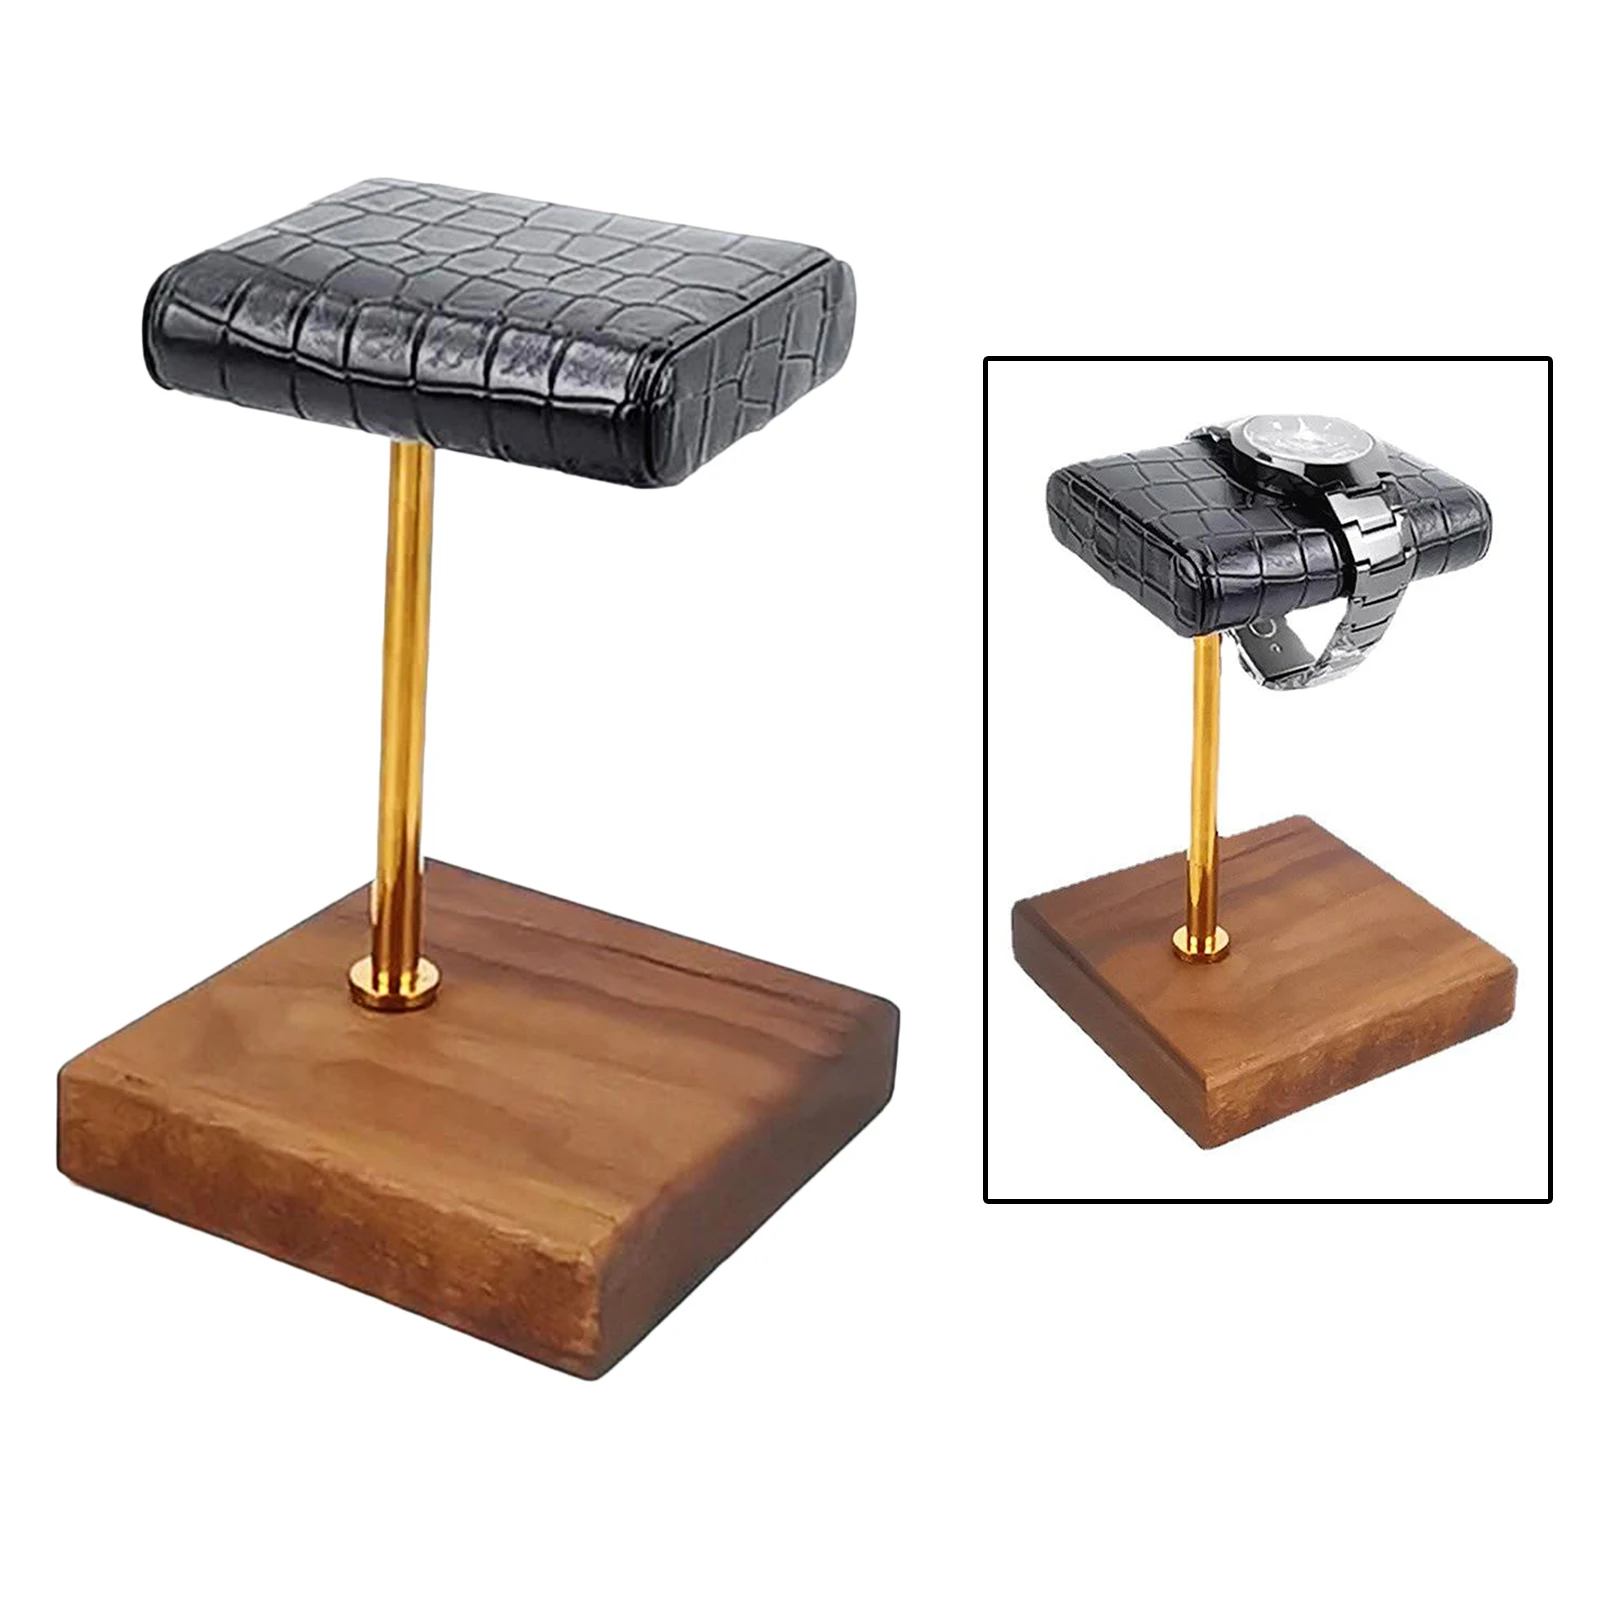 Handcrafted Leather & Marble Watch Display Stand, Home Use or Portable for Travel, Business Trip,  to Rest and Store 